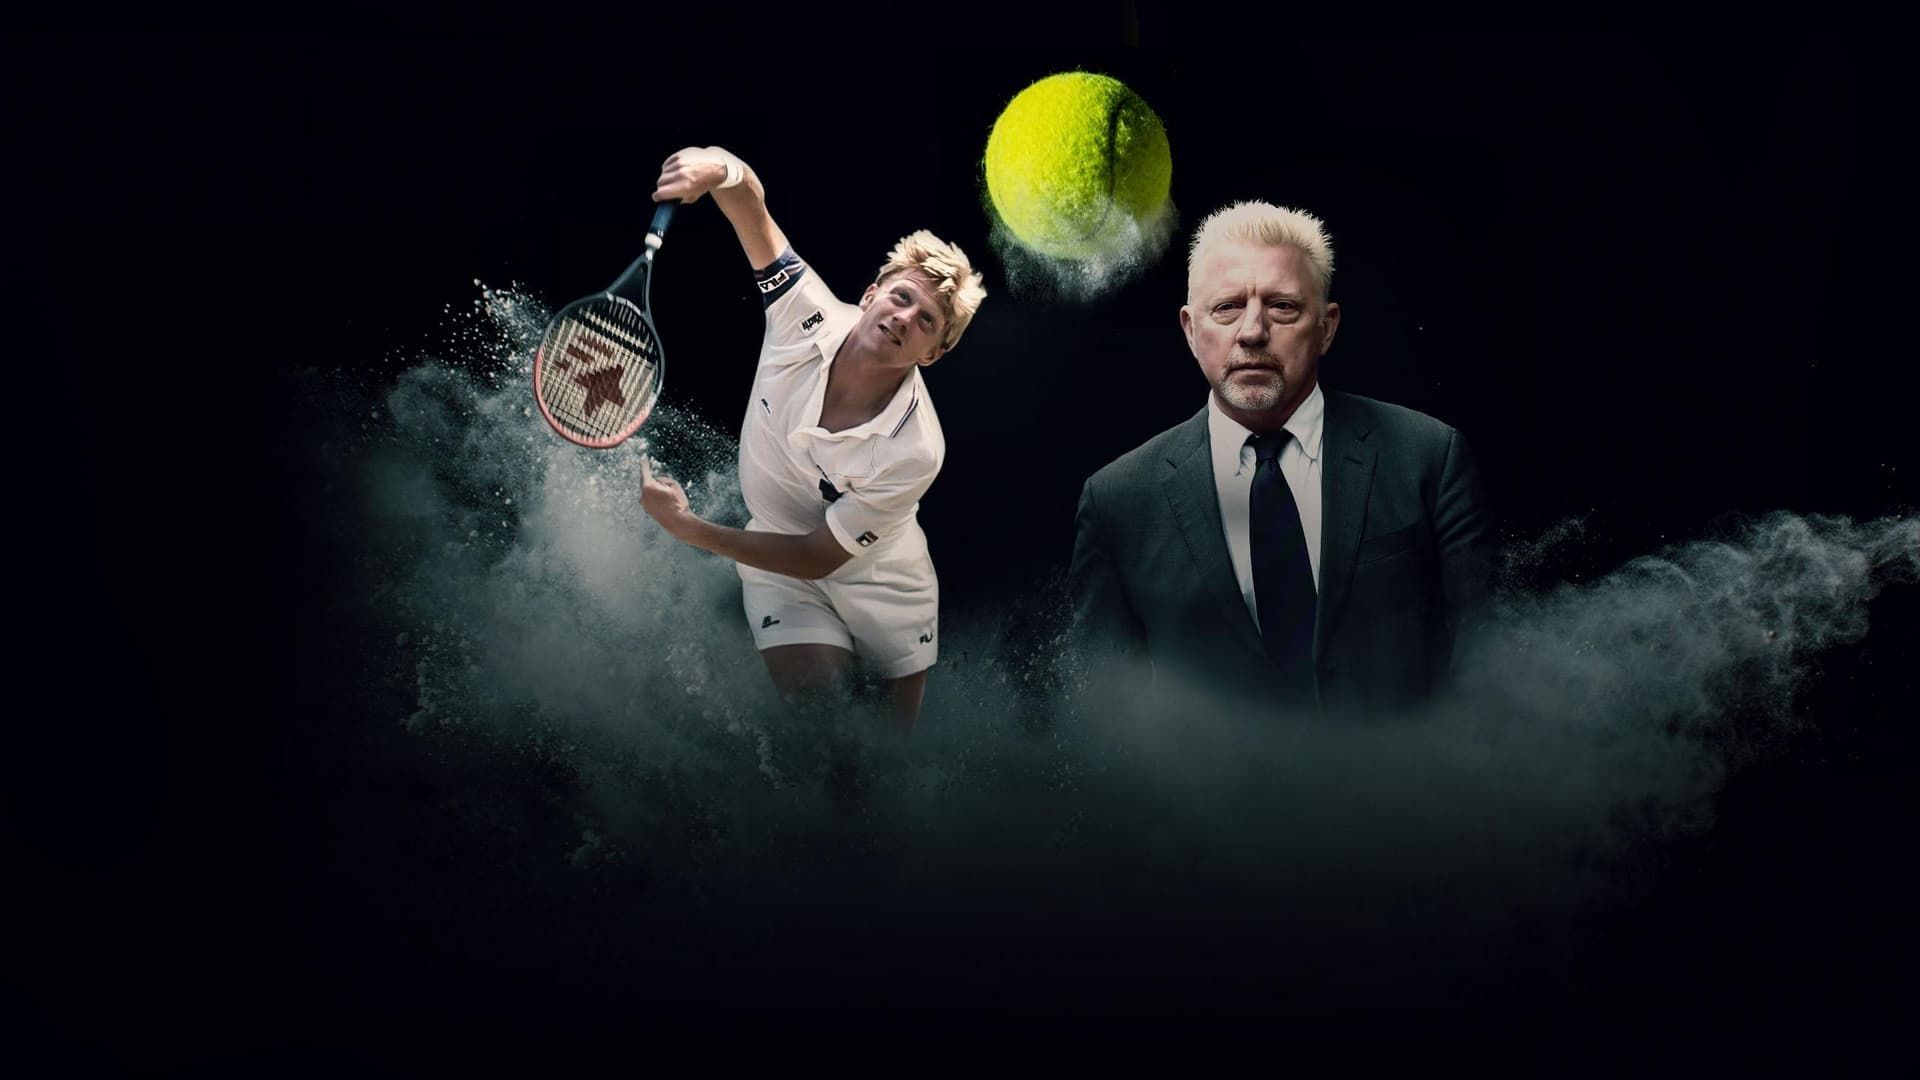 Boris Becker: The Rise and Fall background